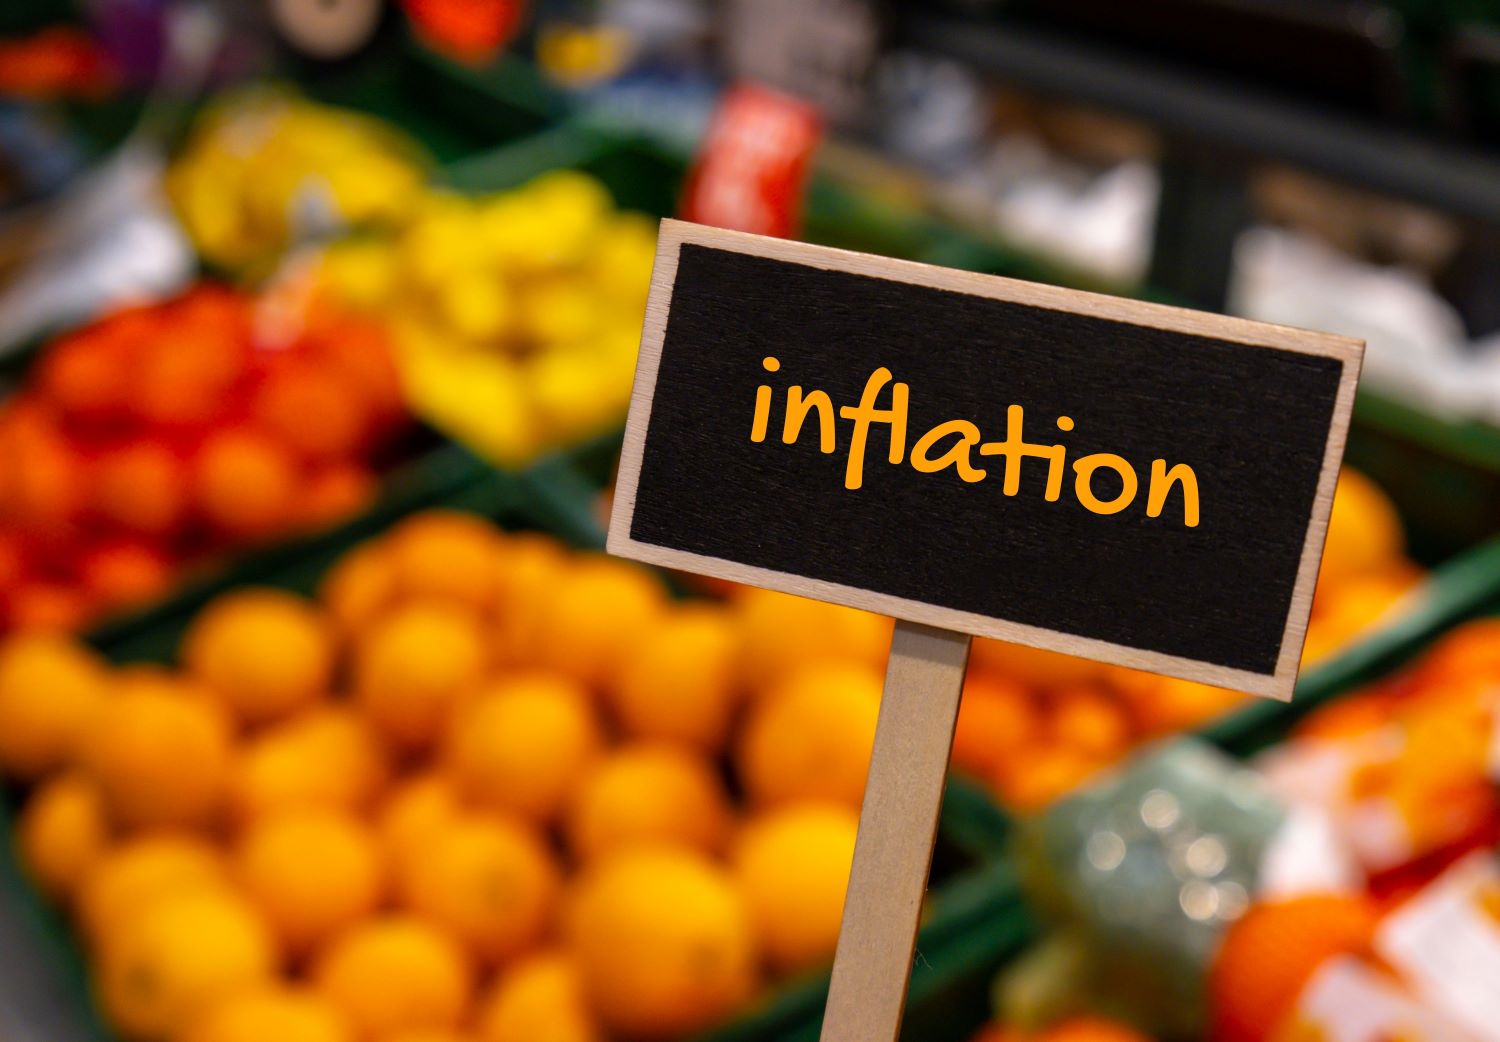 inflation impact price of goods and services consumer investor trends budget planning financial advisor kreitler financial